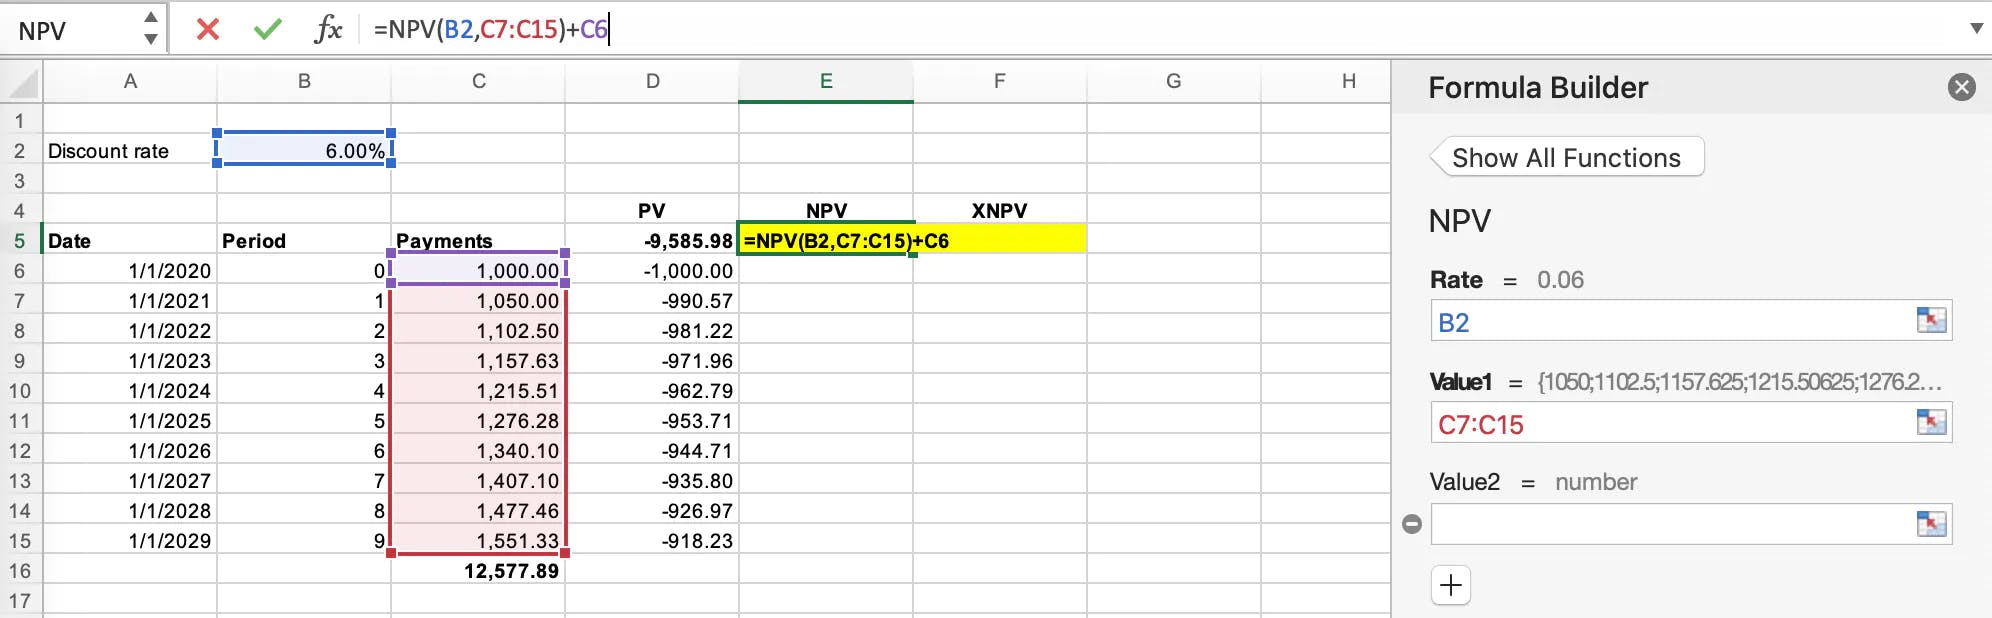 Application of the Net Present Value formula in Microsoft Excel